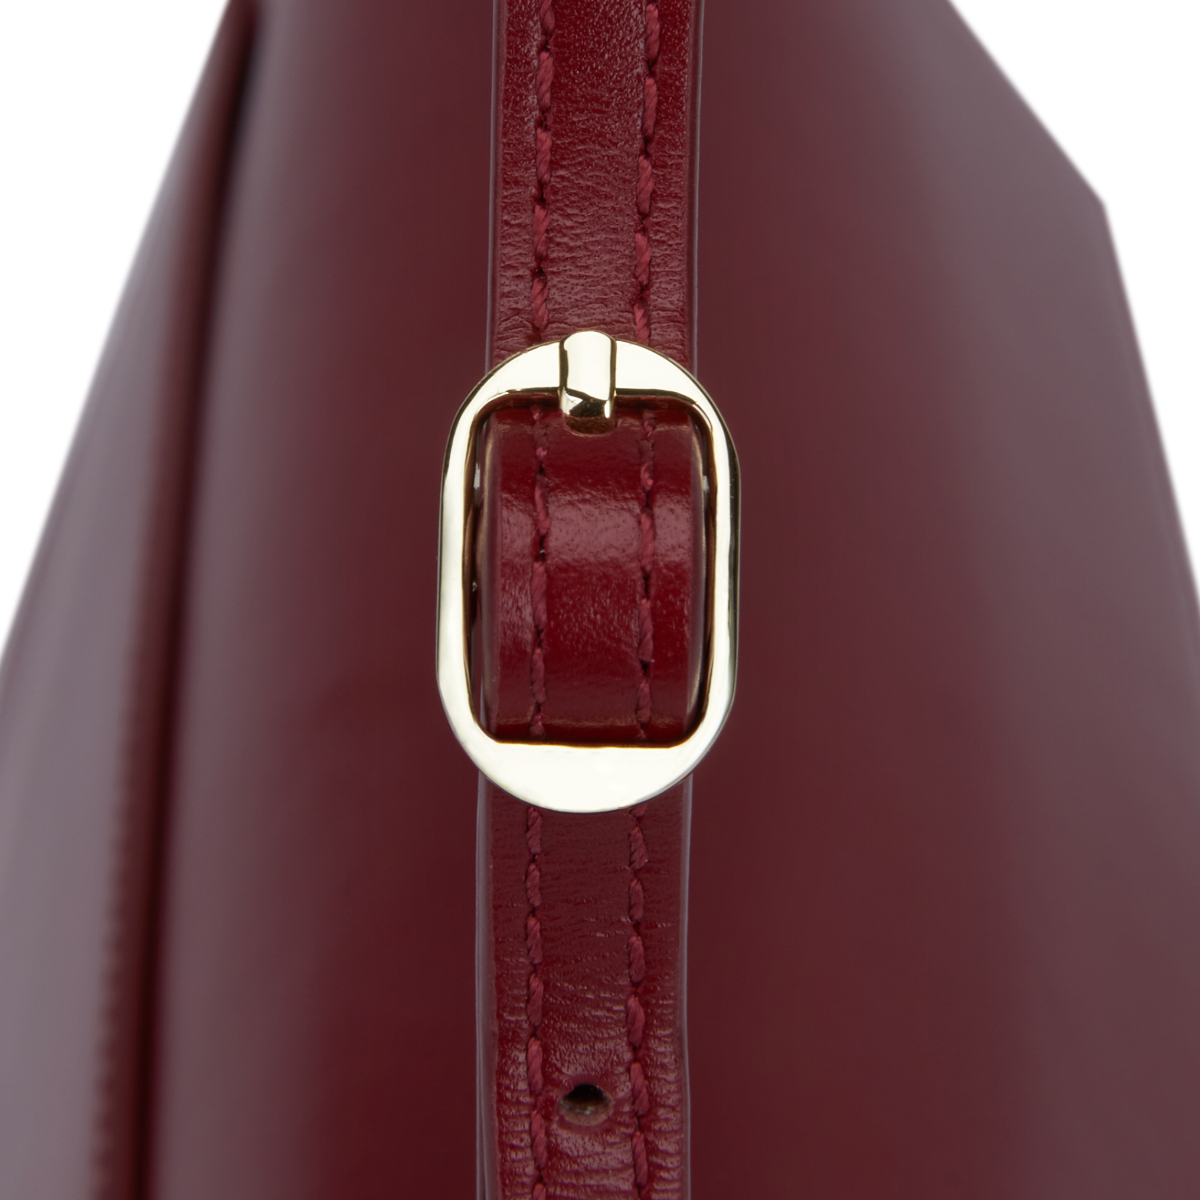 Dark Cherry Shoulder Bag(Pre-Order Only.Will Ship Late May)